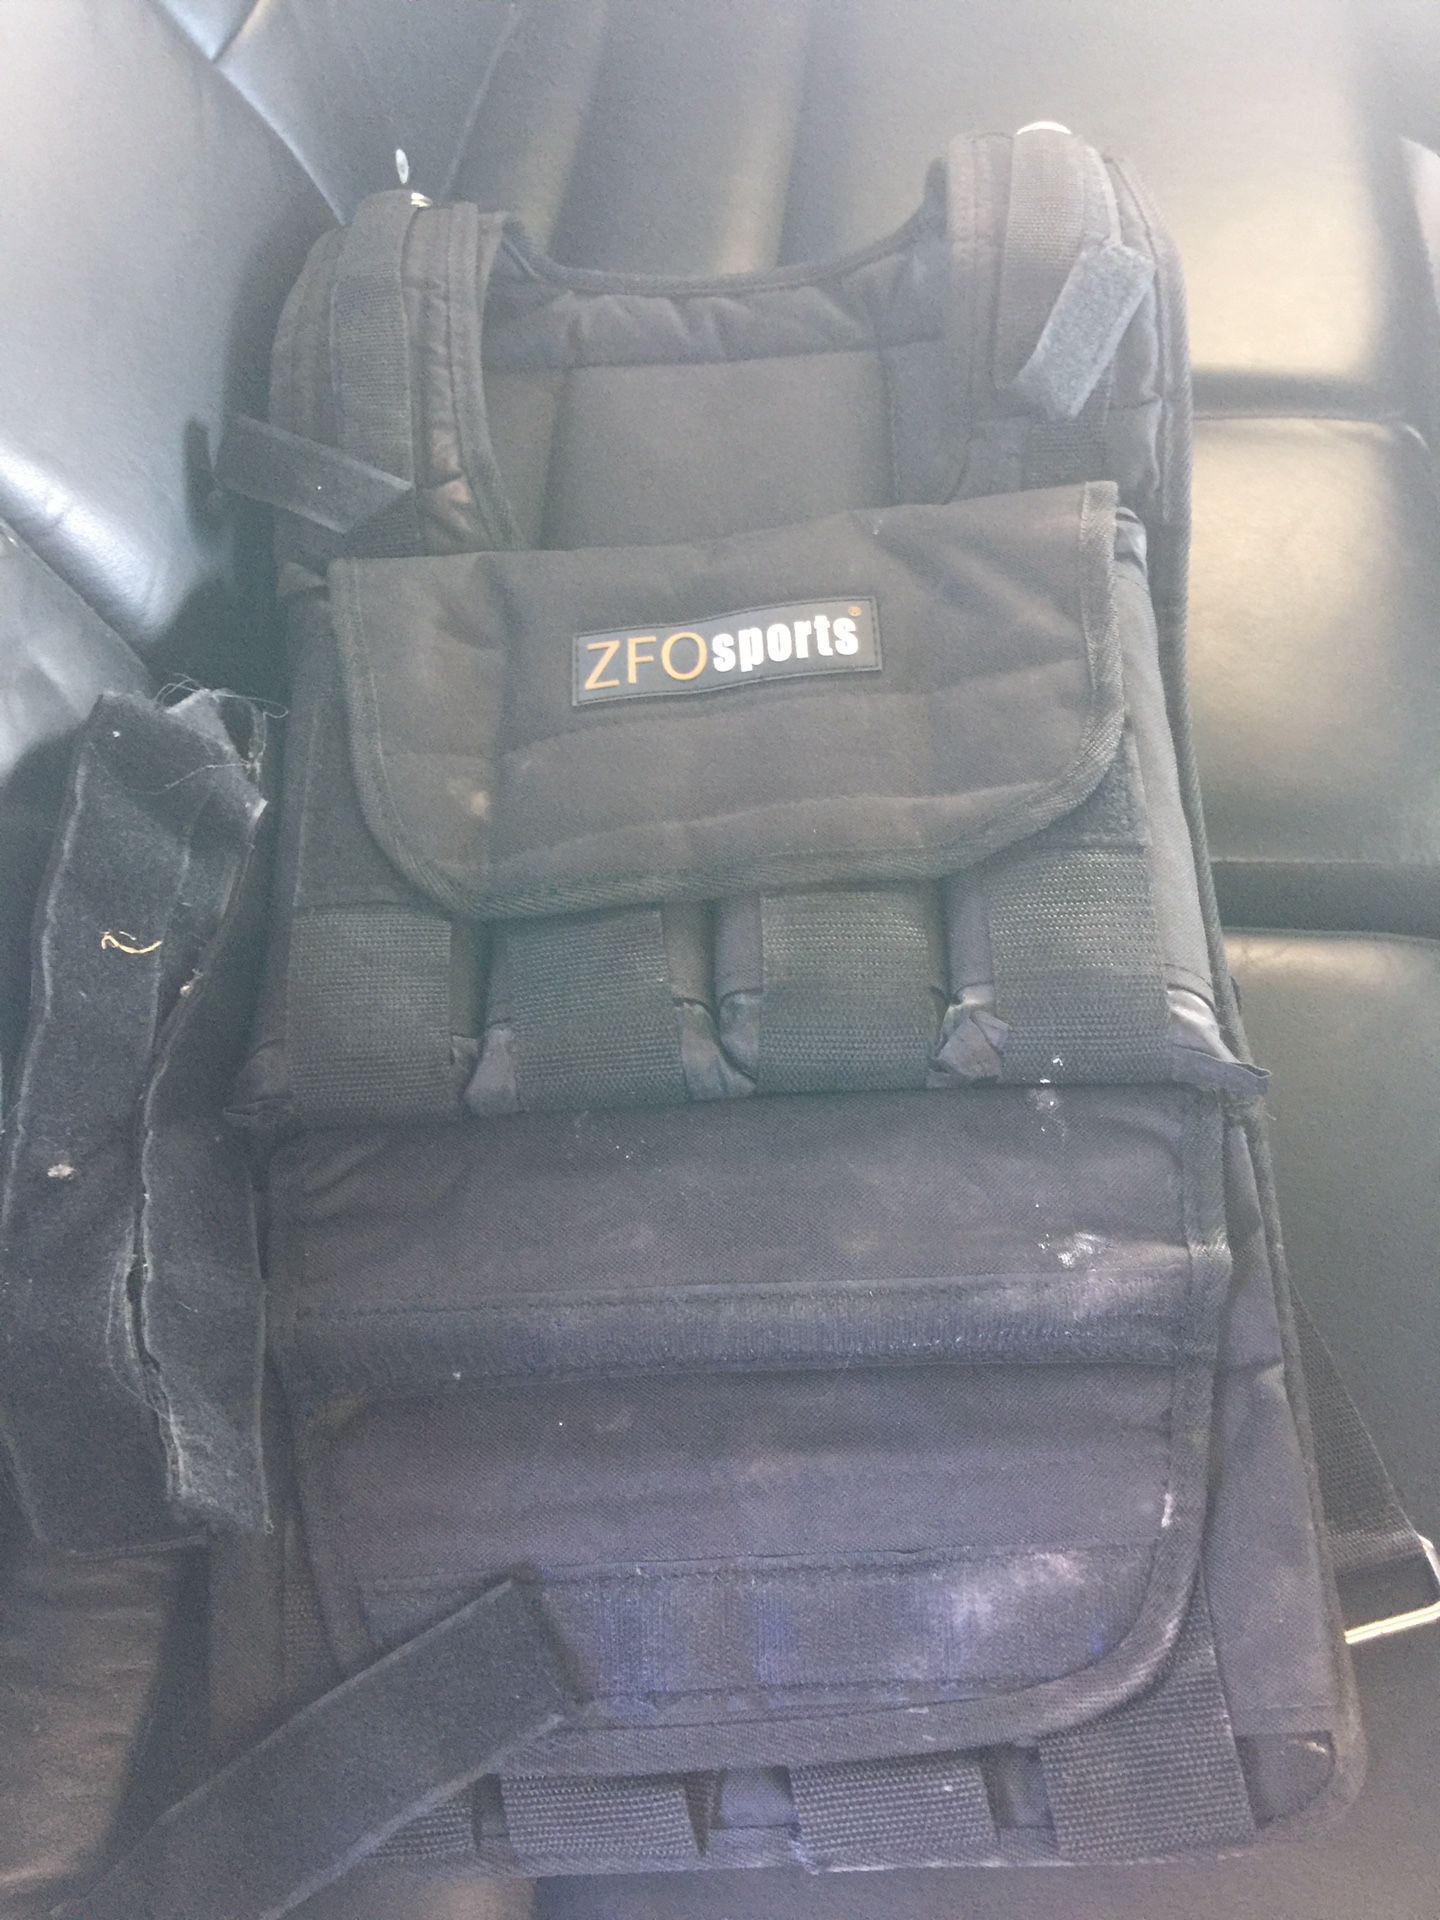 ZFO sports weighted vest adjustable. 35lbs.